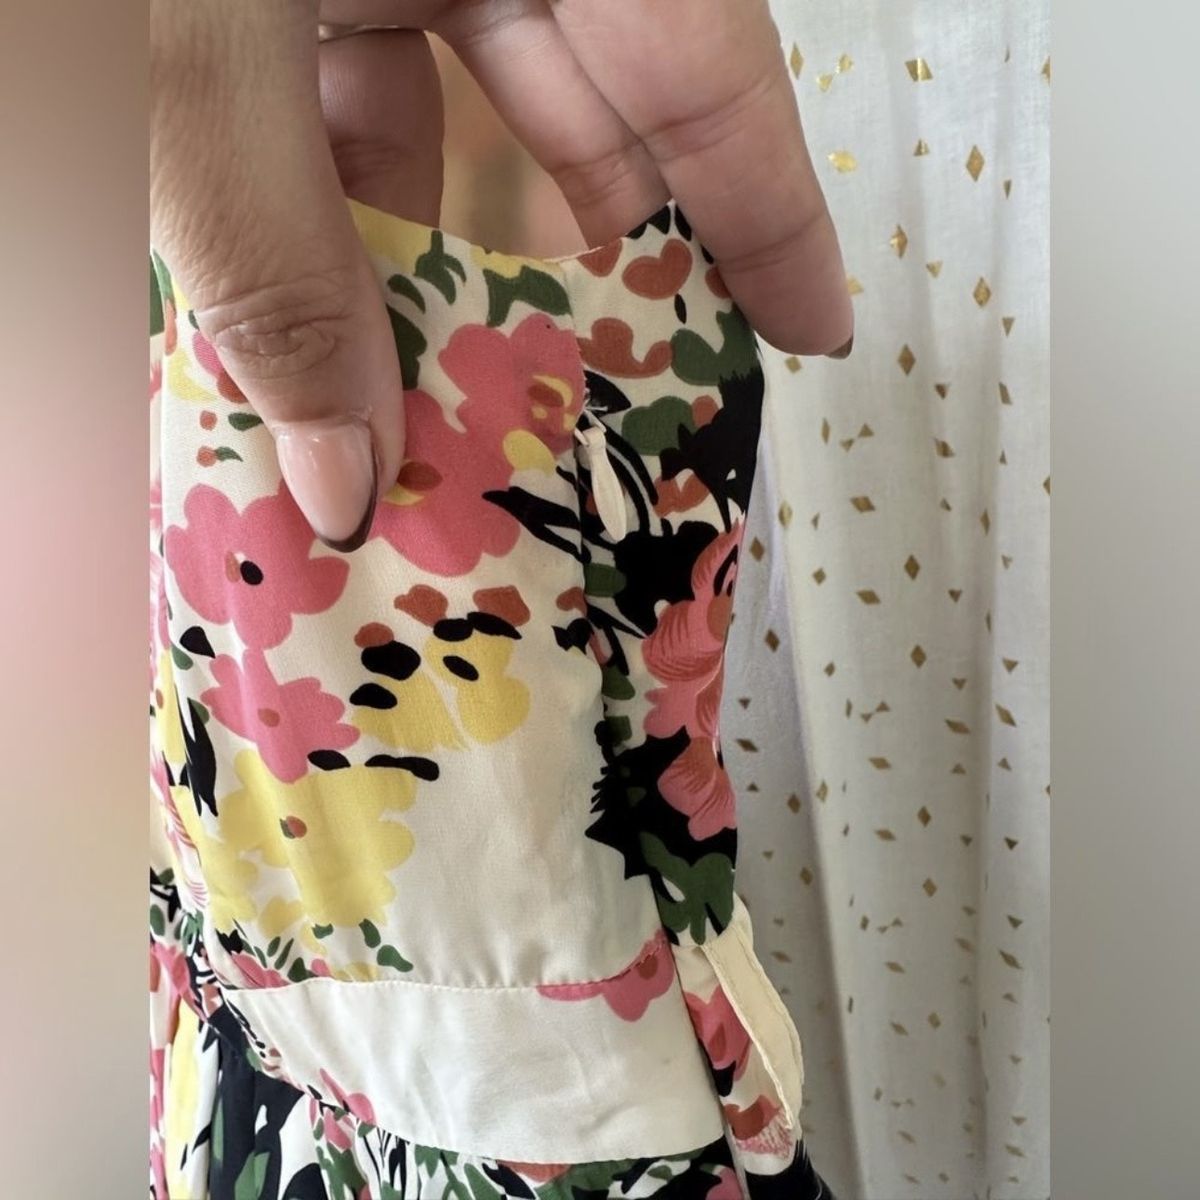 Darling Size S Plunge Floral Yellow Cocktail Dress on Queenly